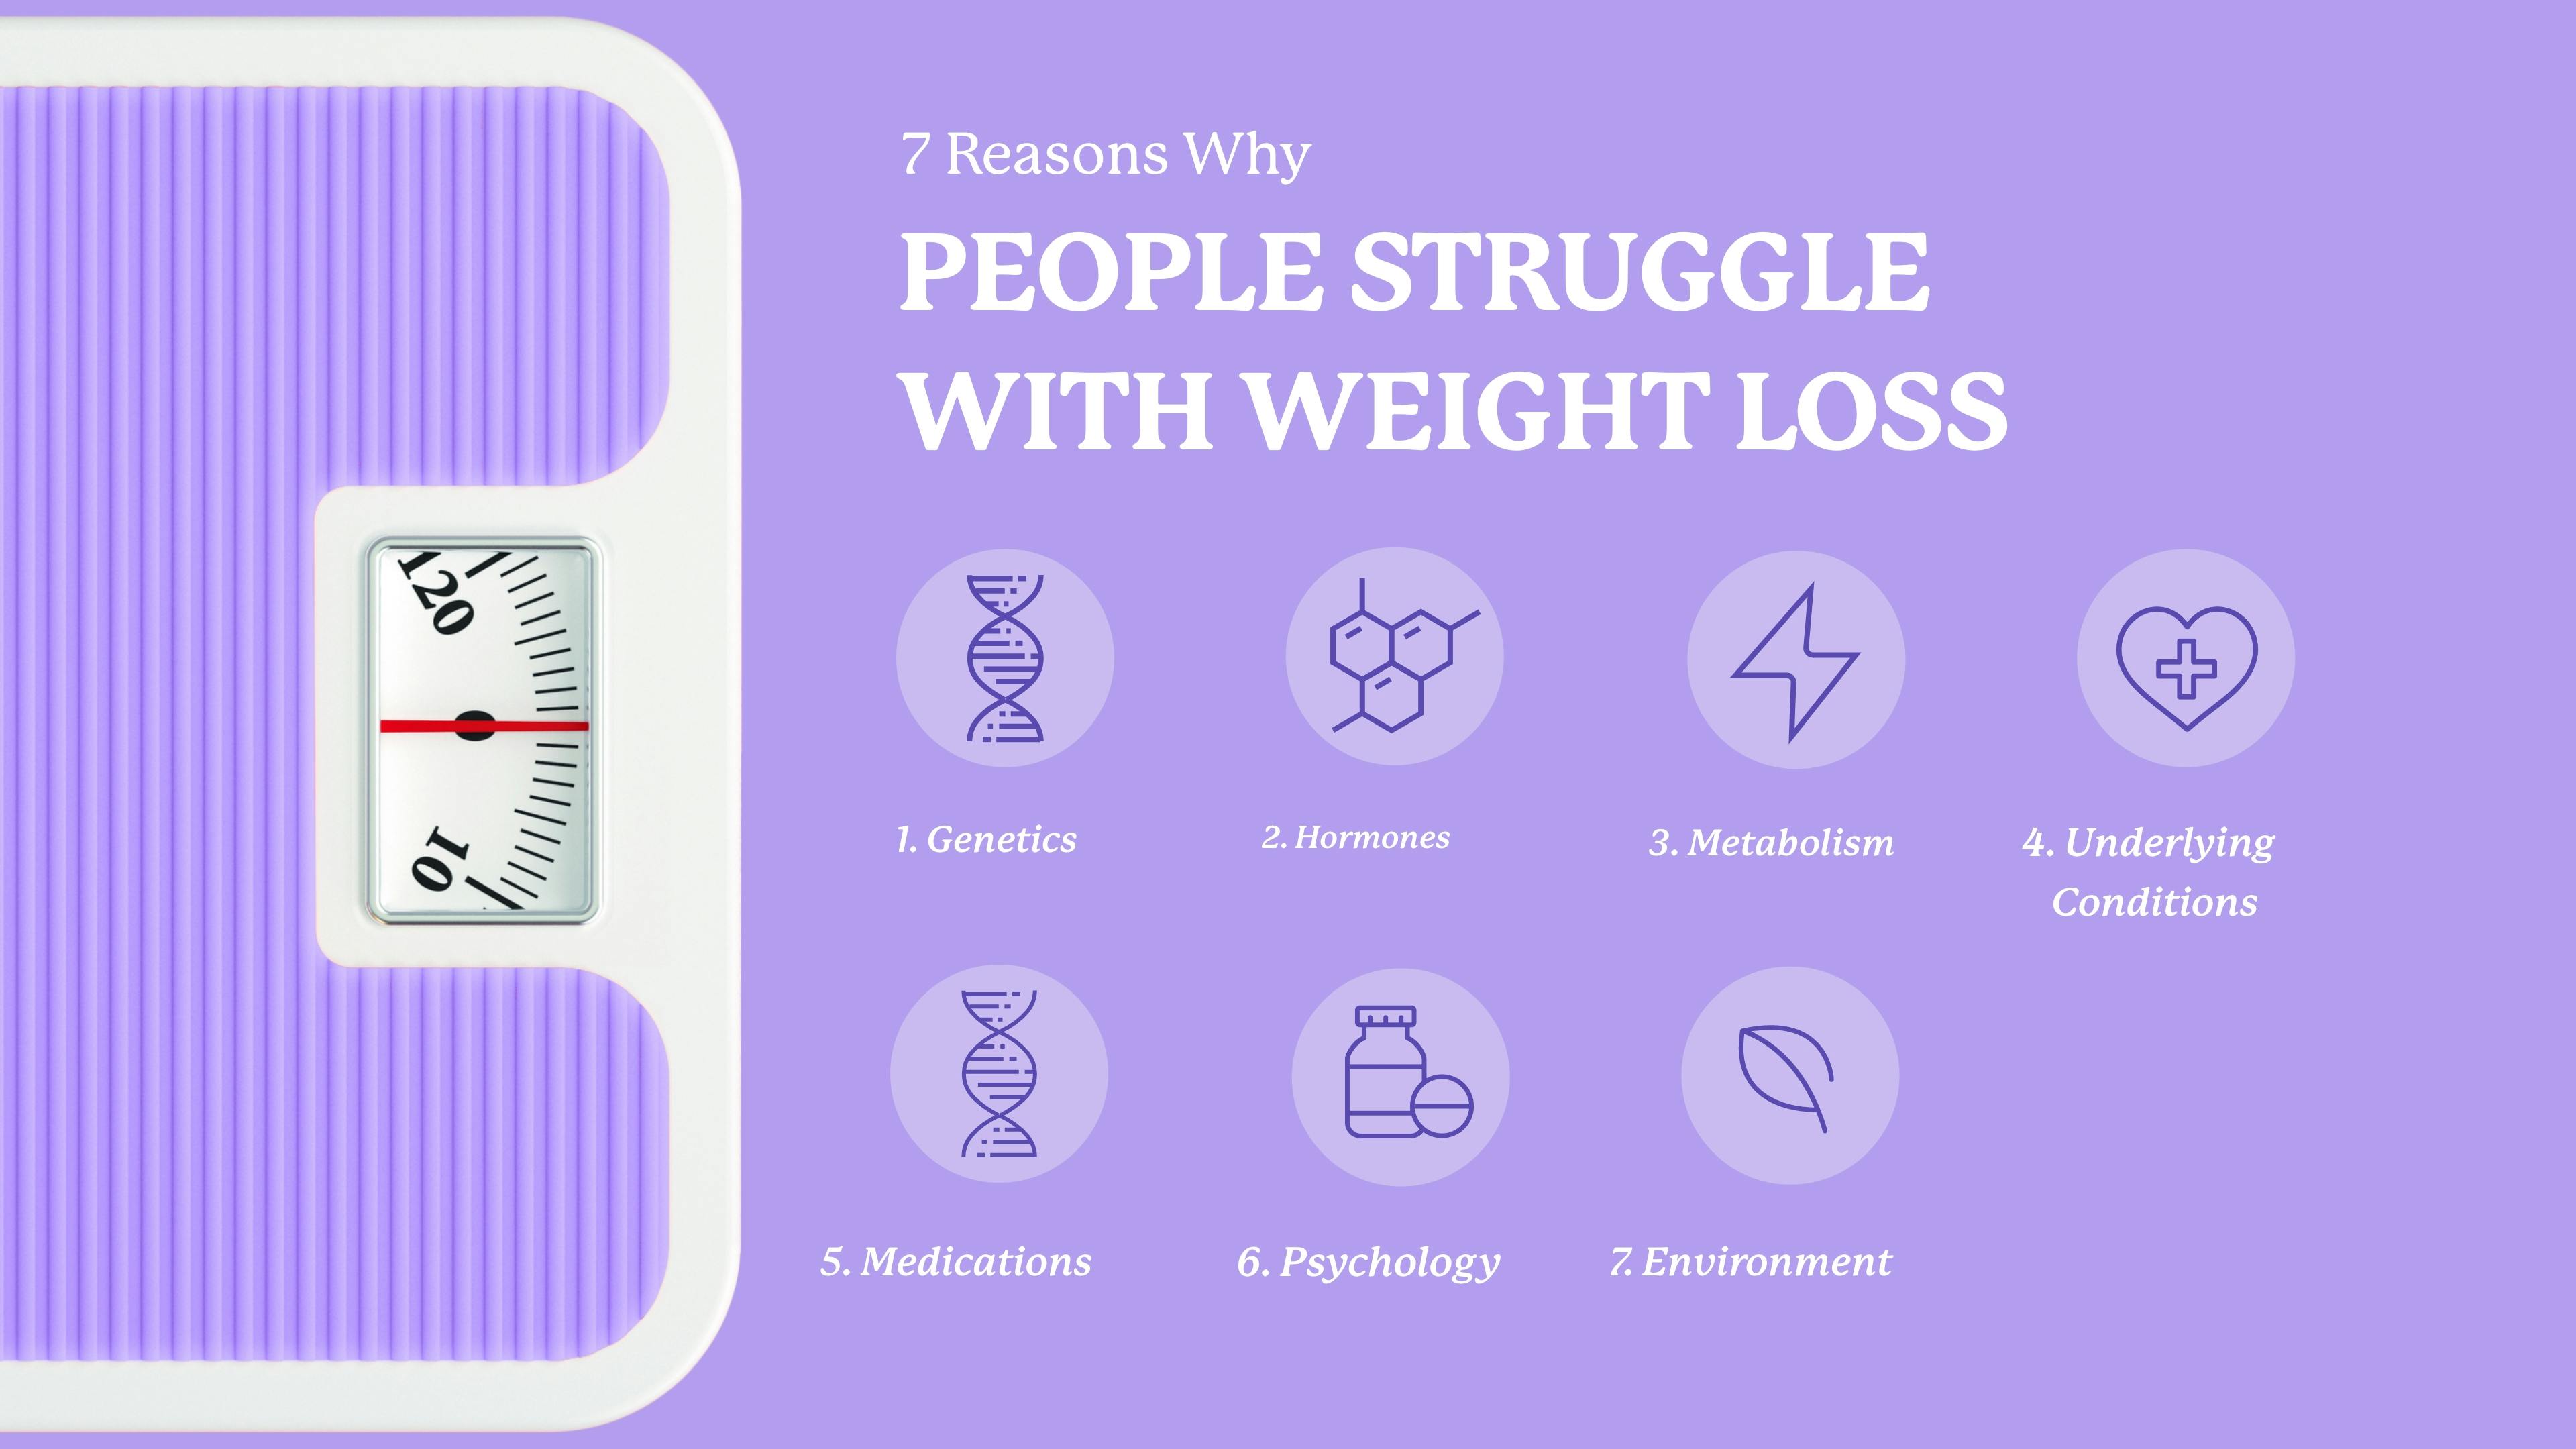 7 Reasons Why People Struggle with Weight Loss